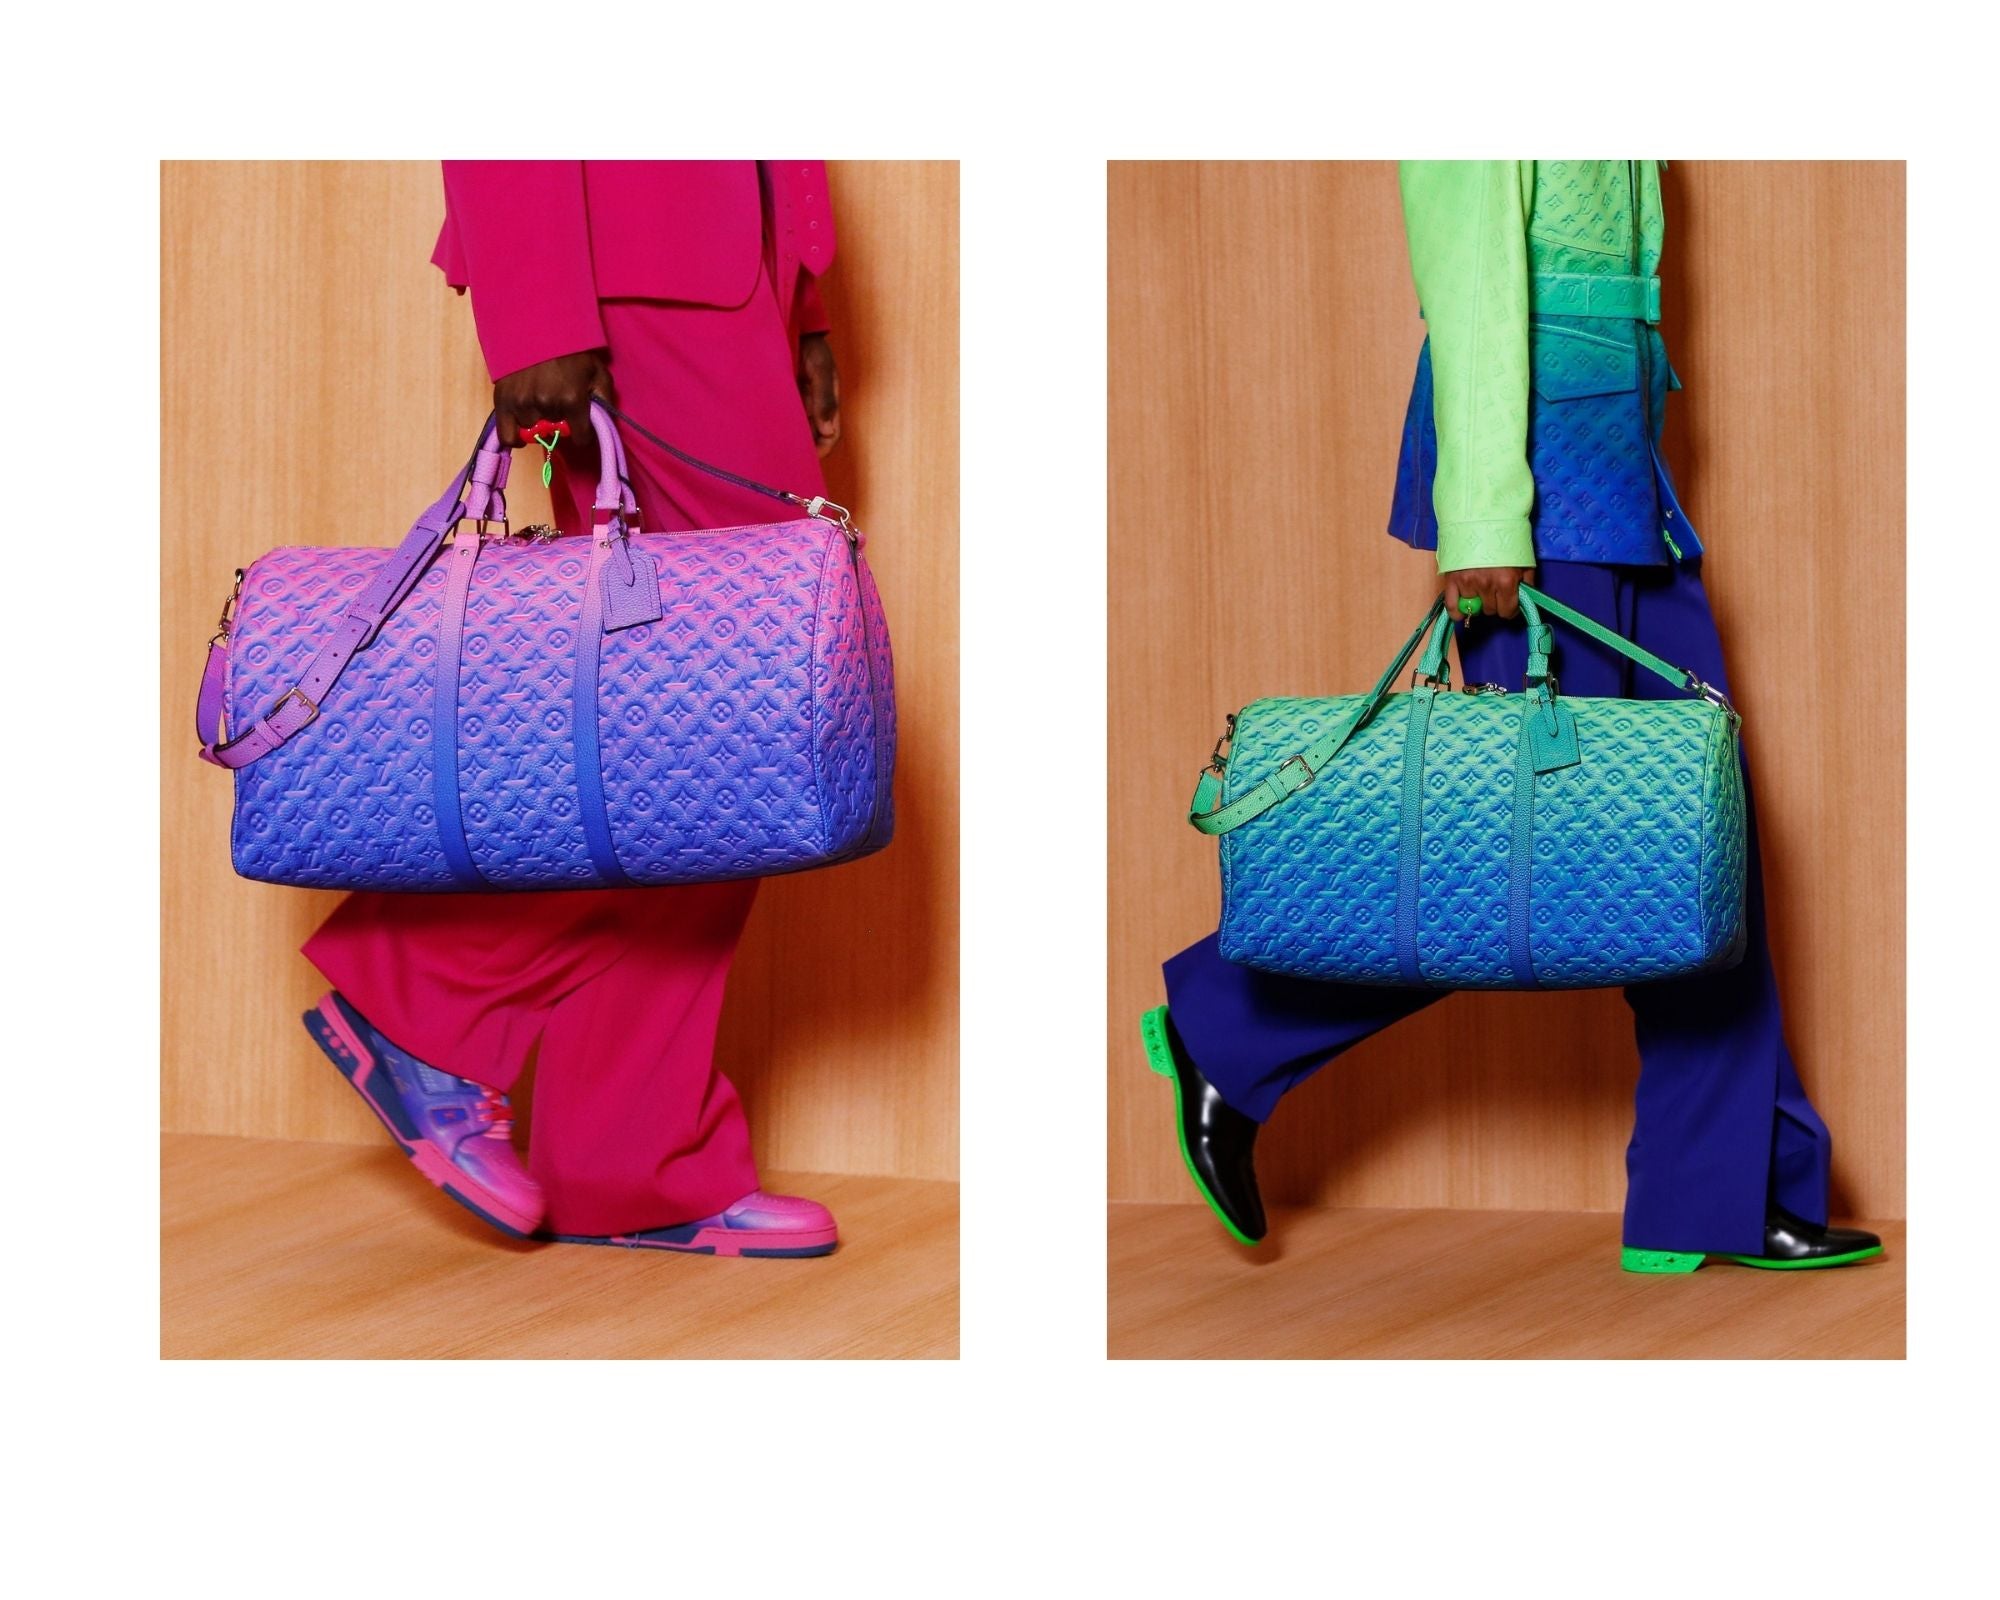 New Season Keepall Bags To Love From Louis Vuitton #LVMenSS22 - BAGAHOLICBOY